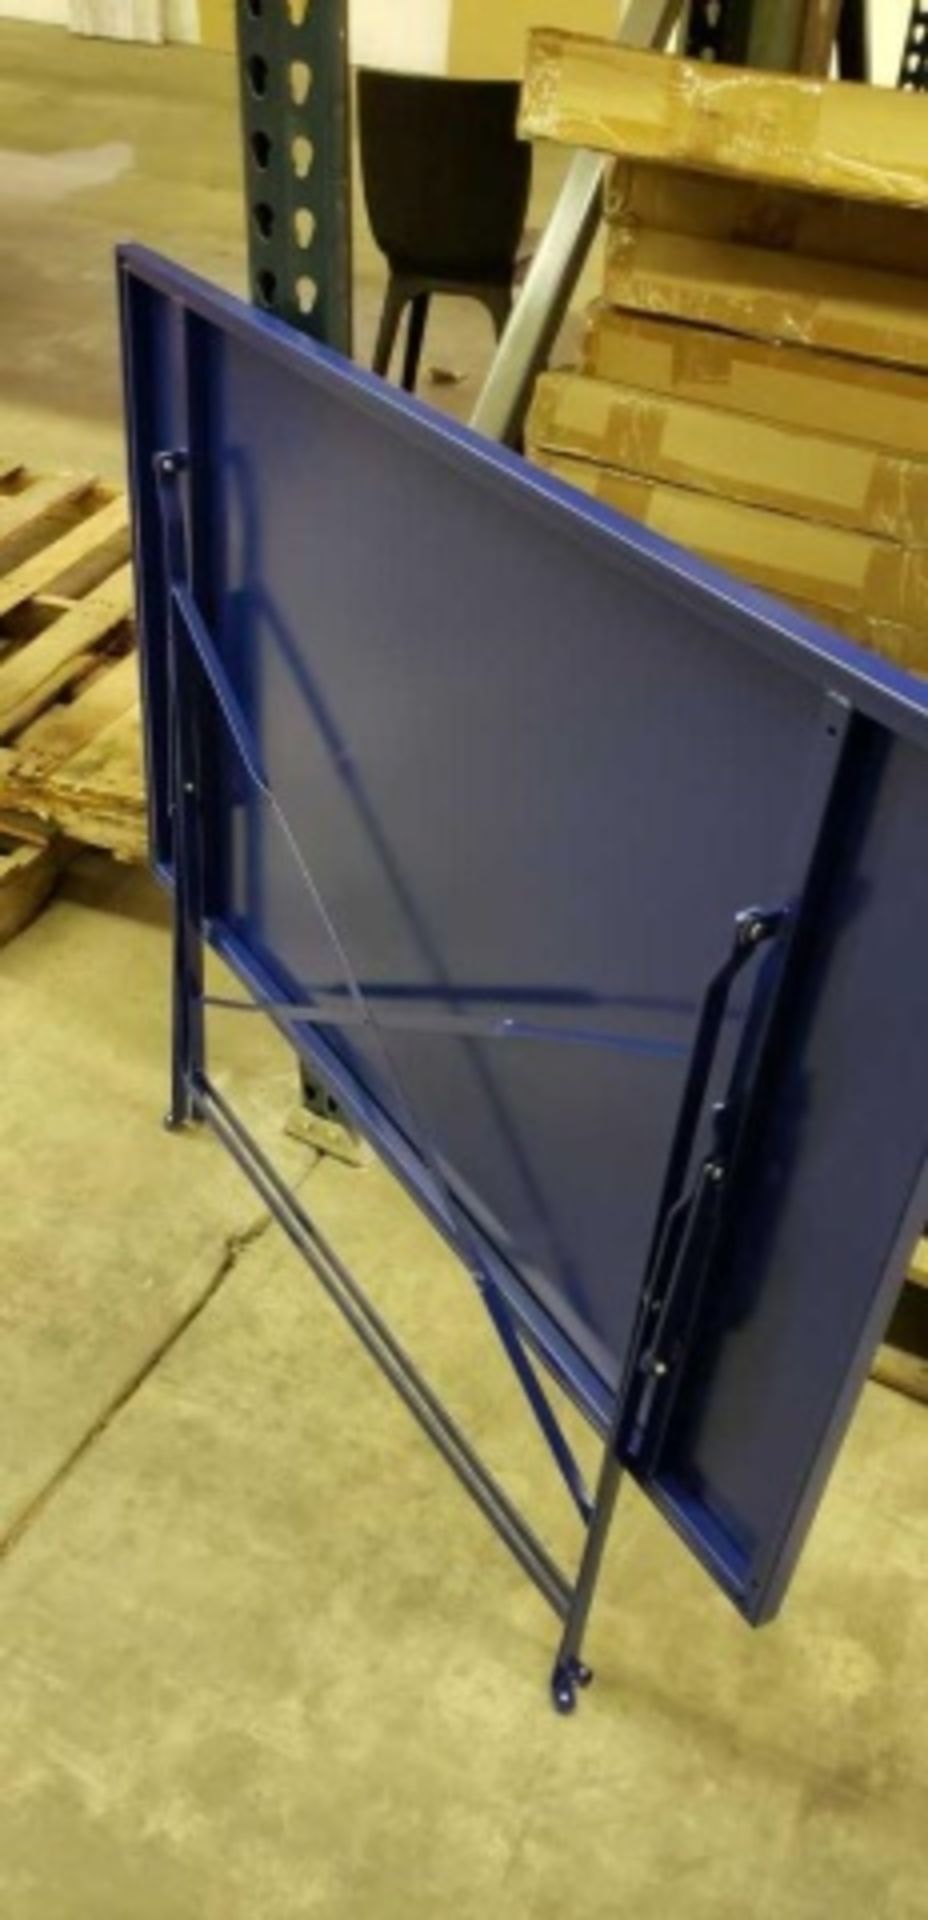 Jardin Rectangle Folding Table - Blue. ElectroZinc treated steel, powder coated. Qty 16 tables. - Image 4 of 6